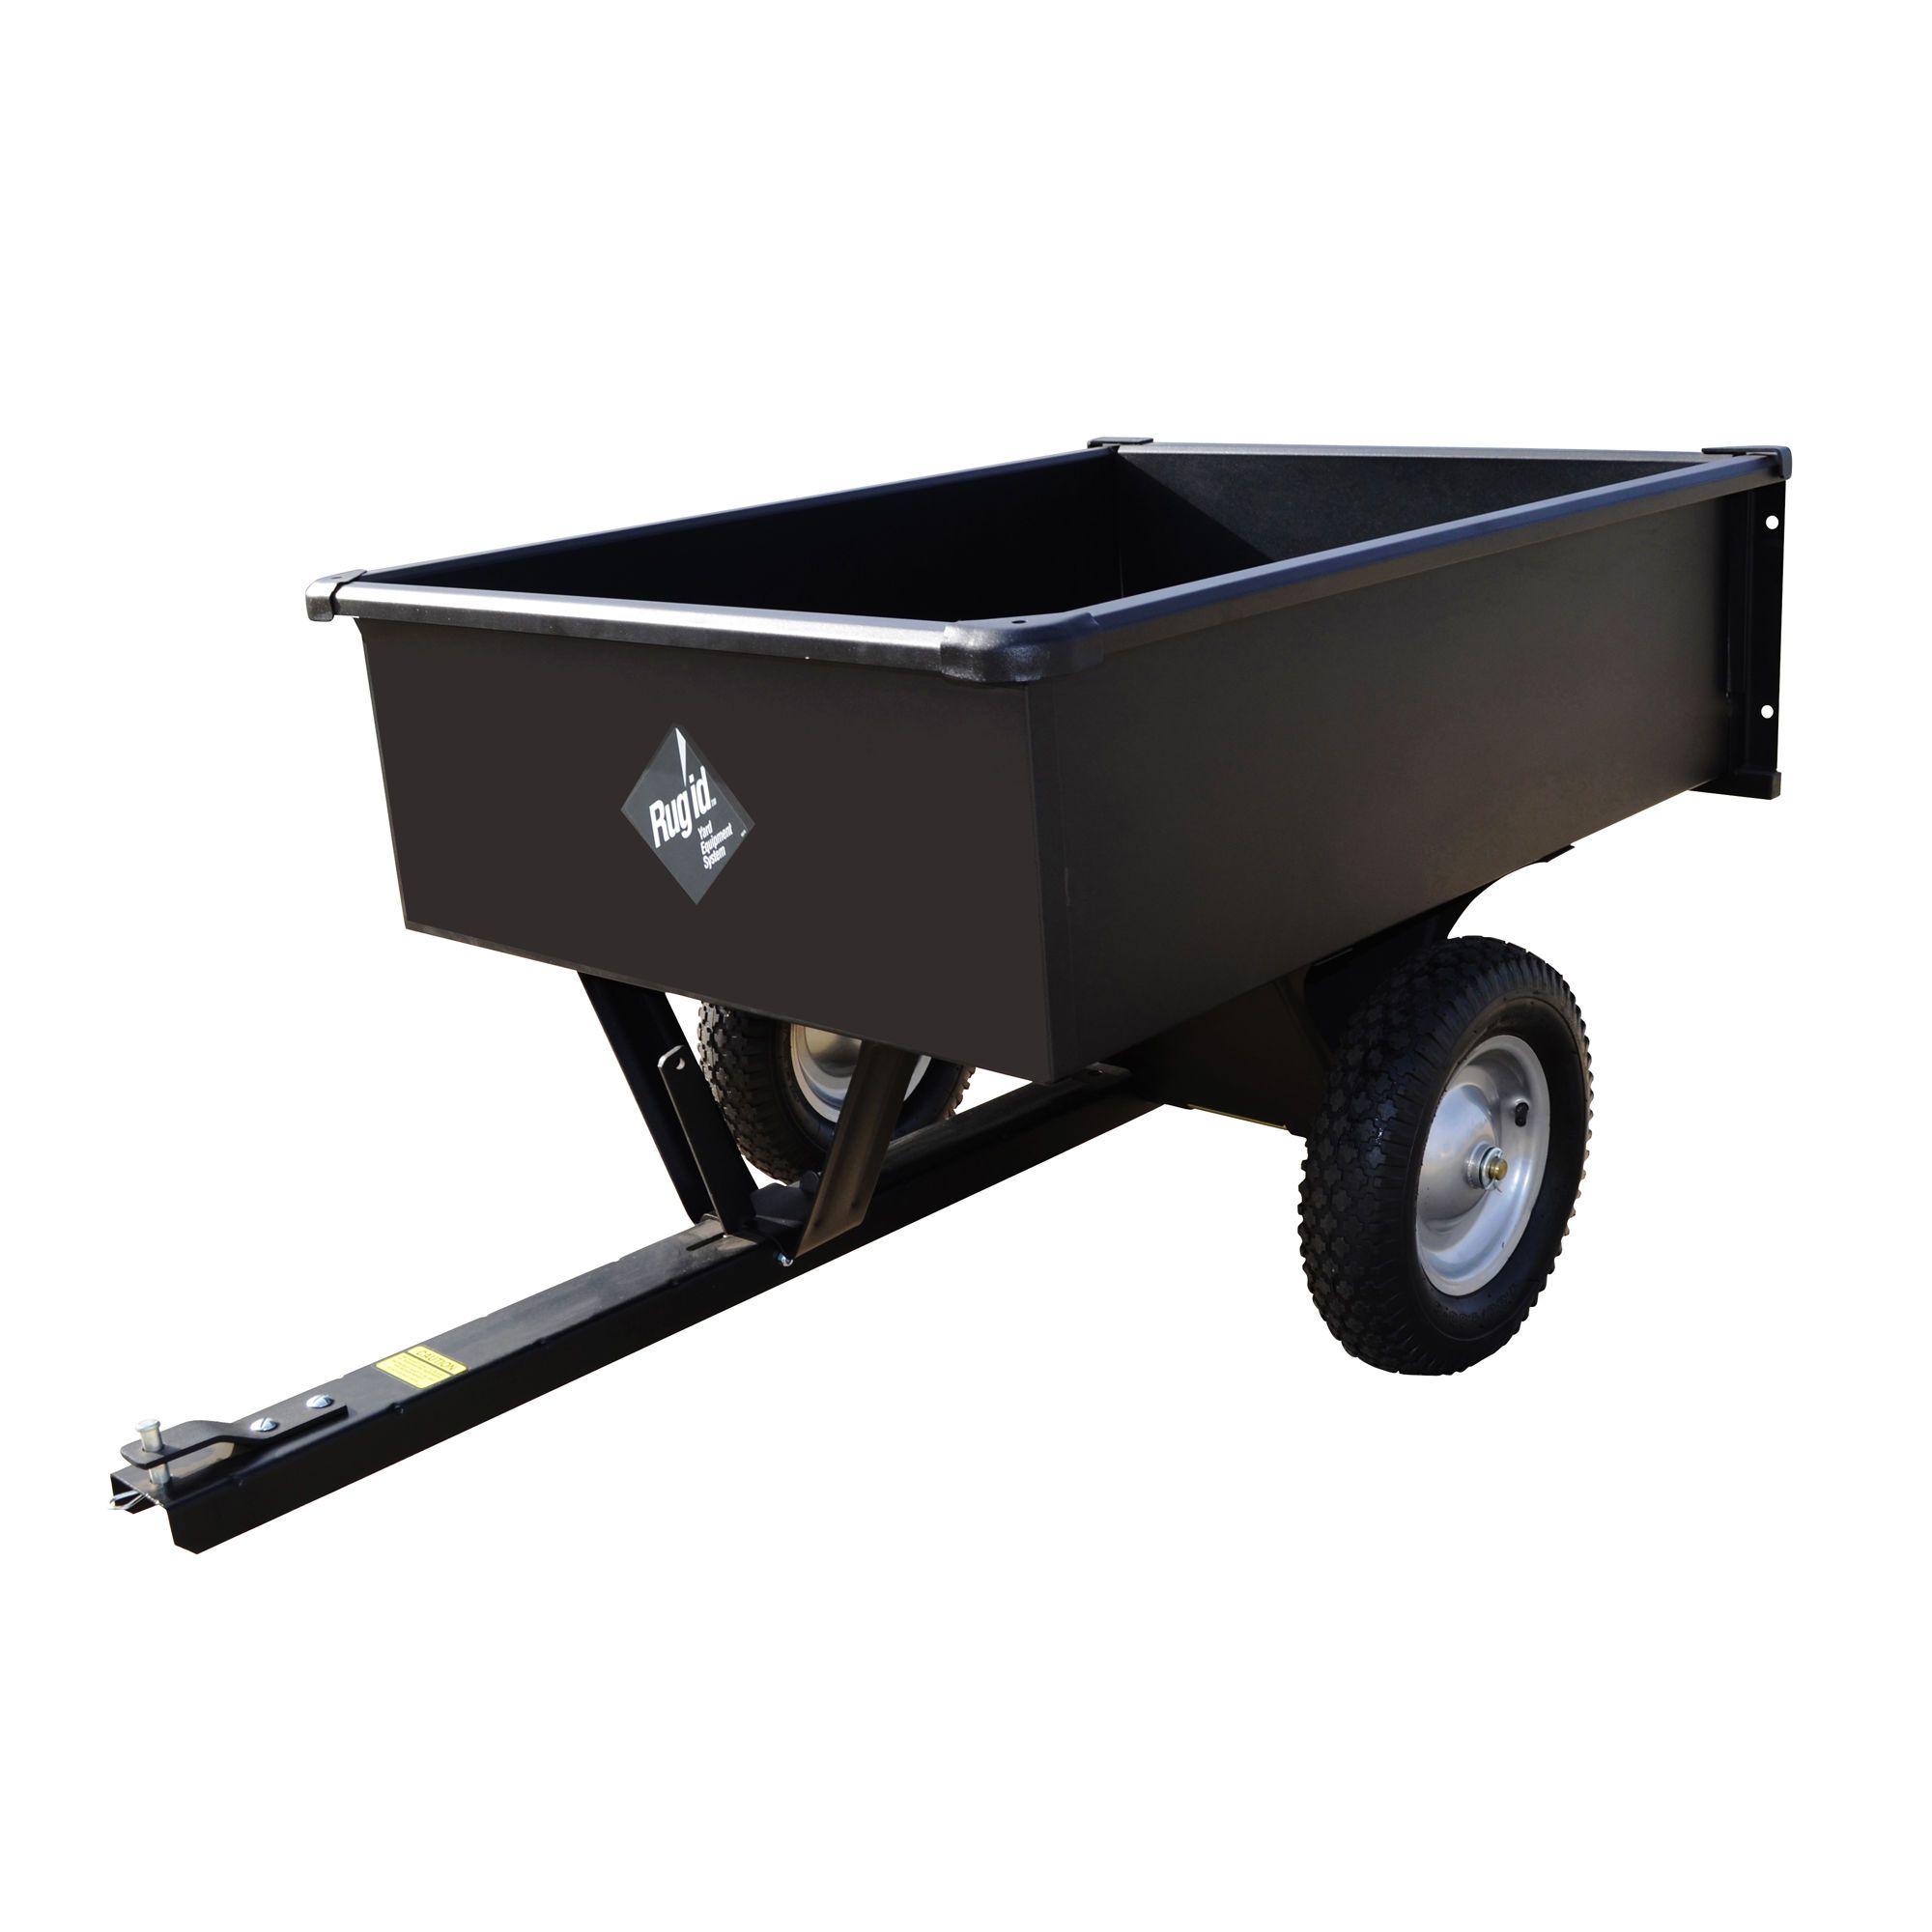 Trailing dump cart from PRECISION PRODUCTS | BMR